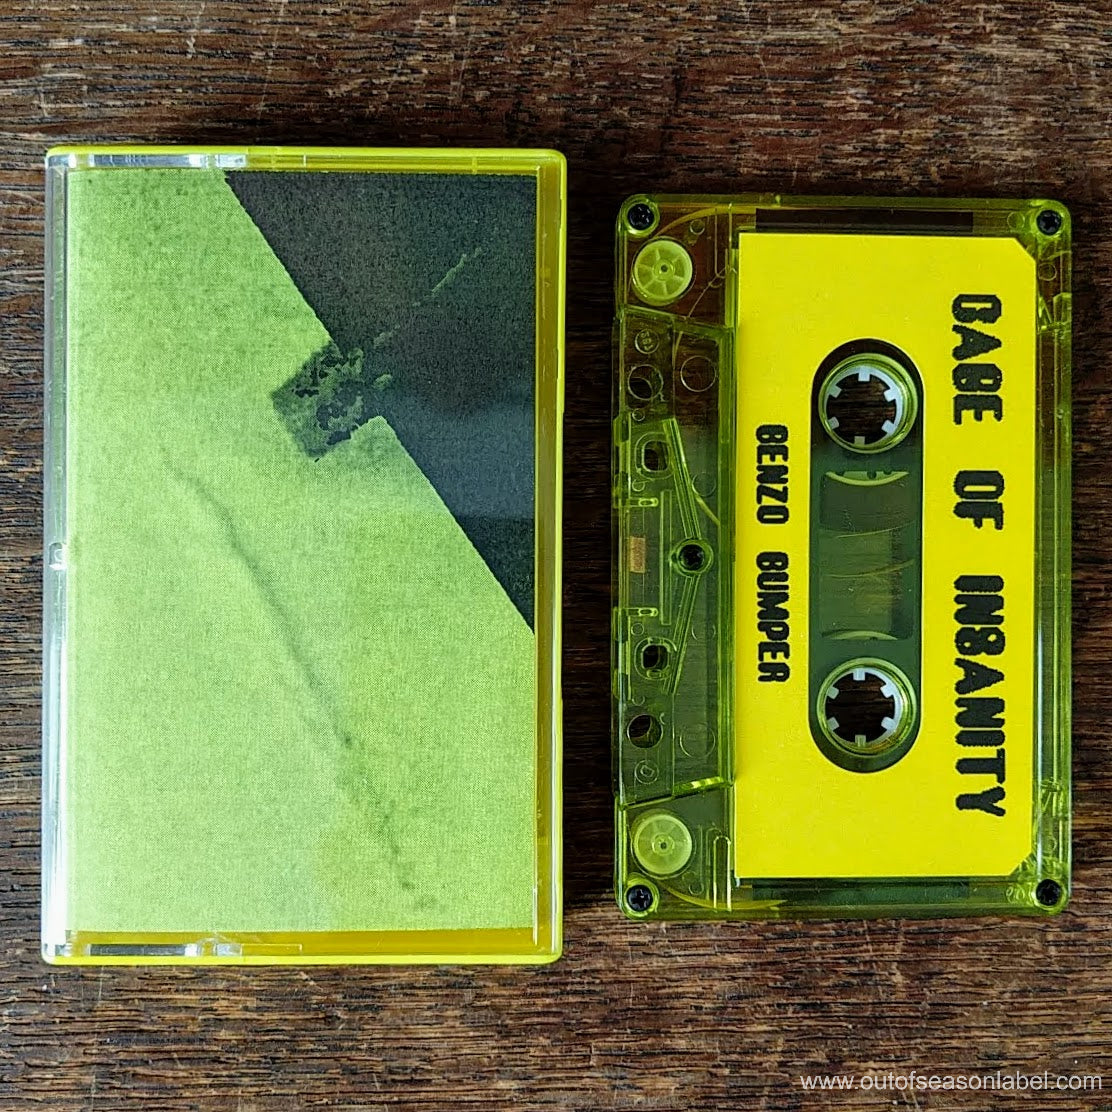 [SOLD OUT] CAGE OF INSANITY "Benzo Bumper" Cassette Tape